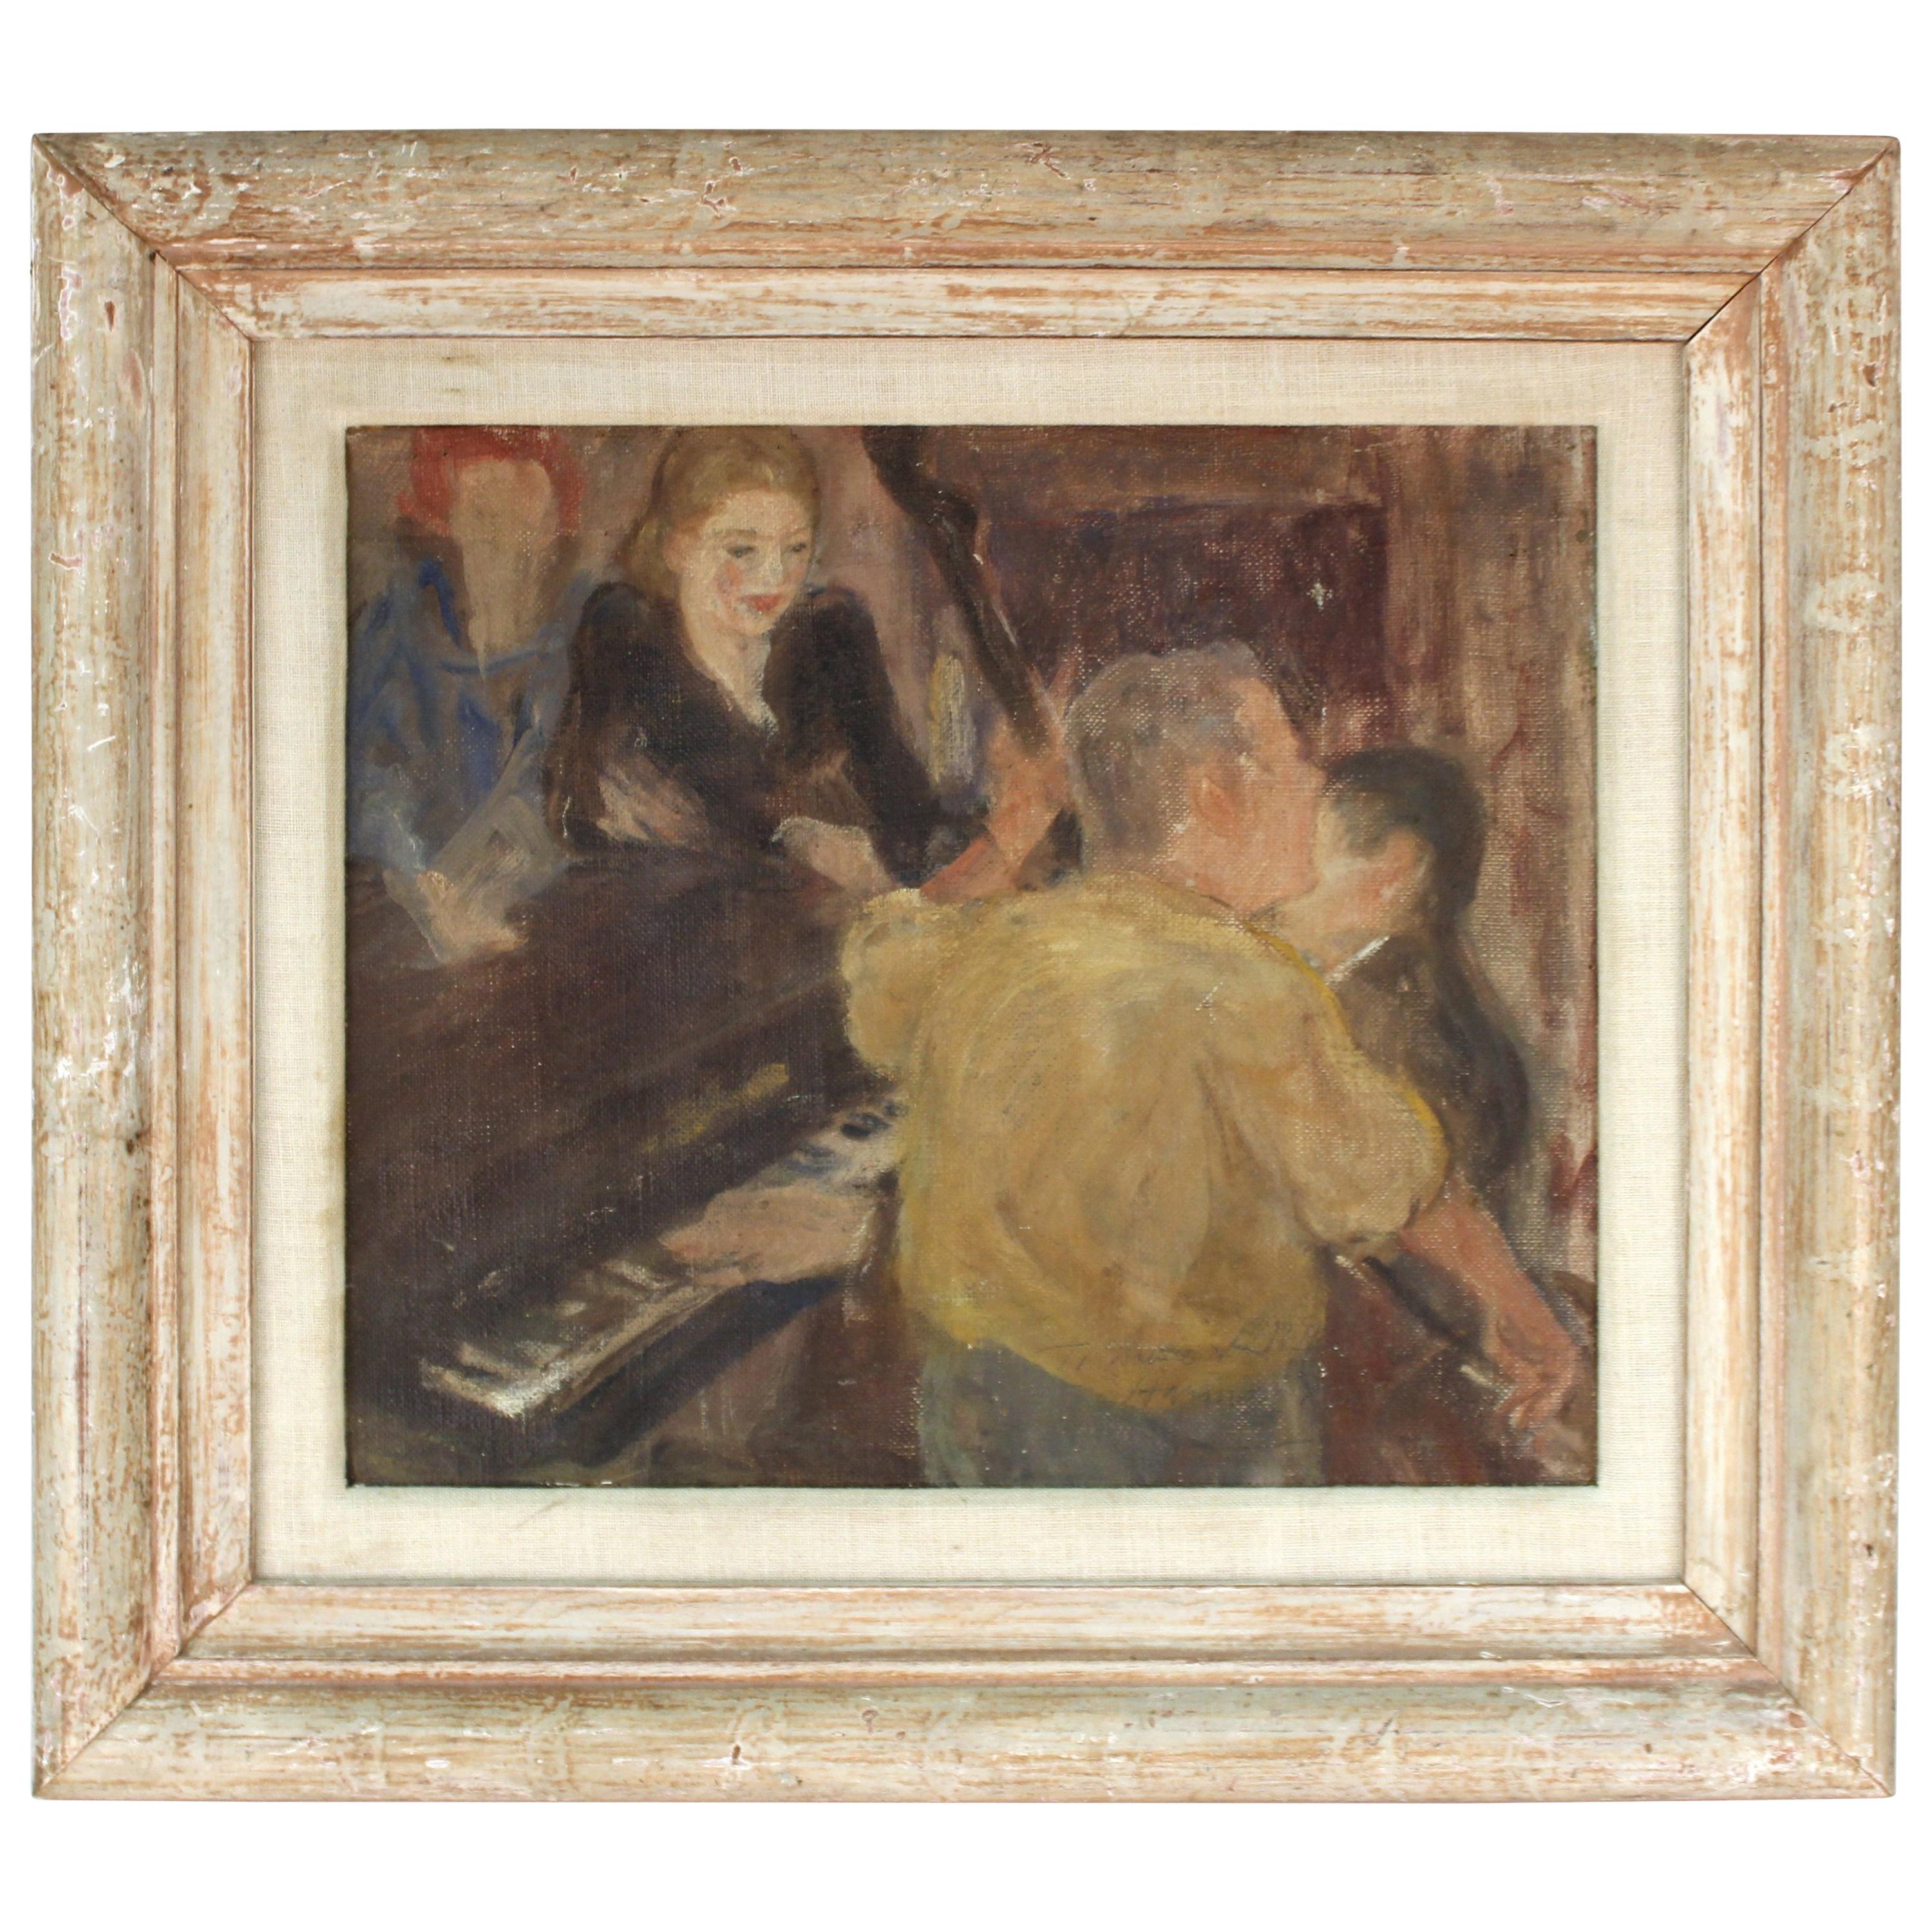 Modern Genre Oil on Canvas Painting of a Jazz Singer with Pianist